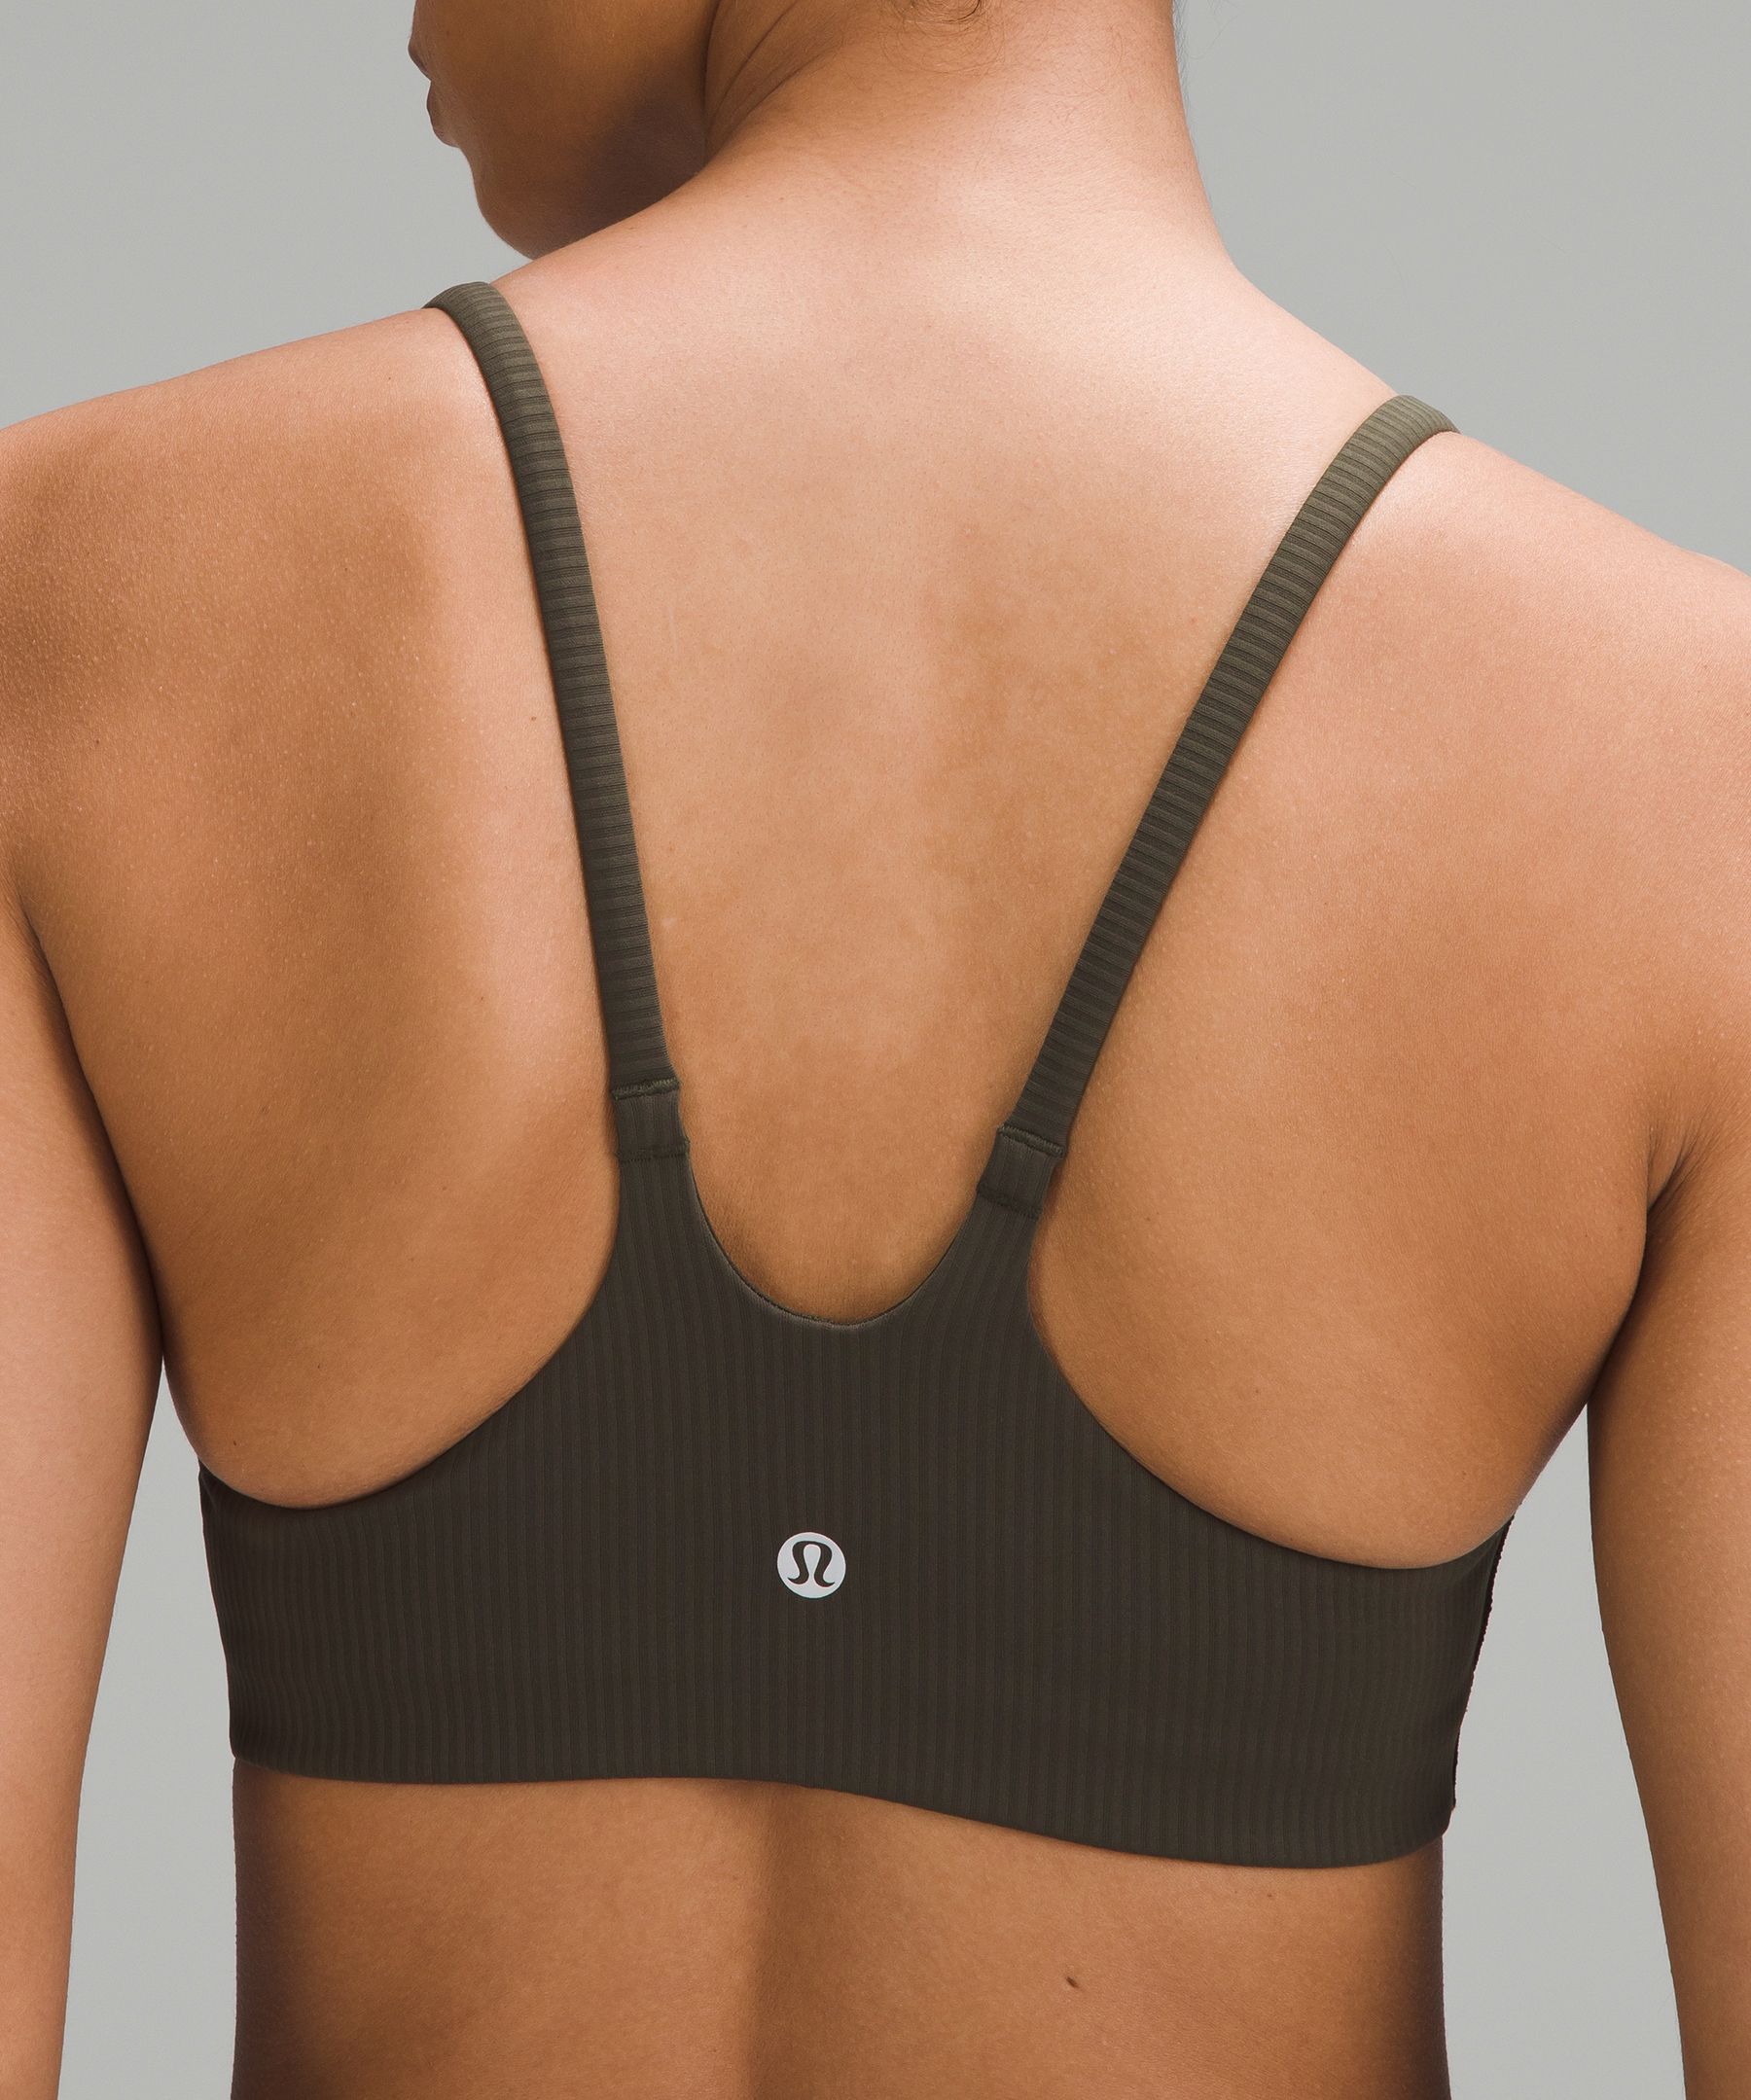 lululemon - This medium-support strappy bra is made to fit like a